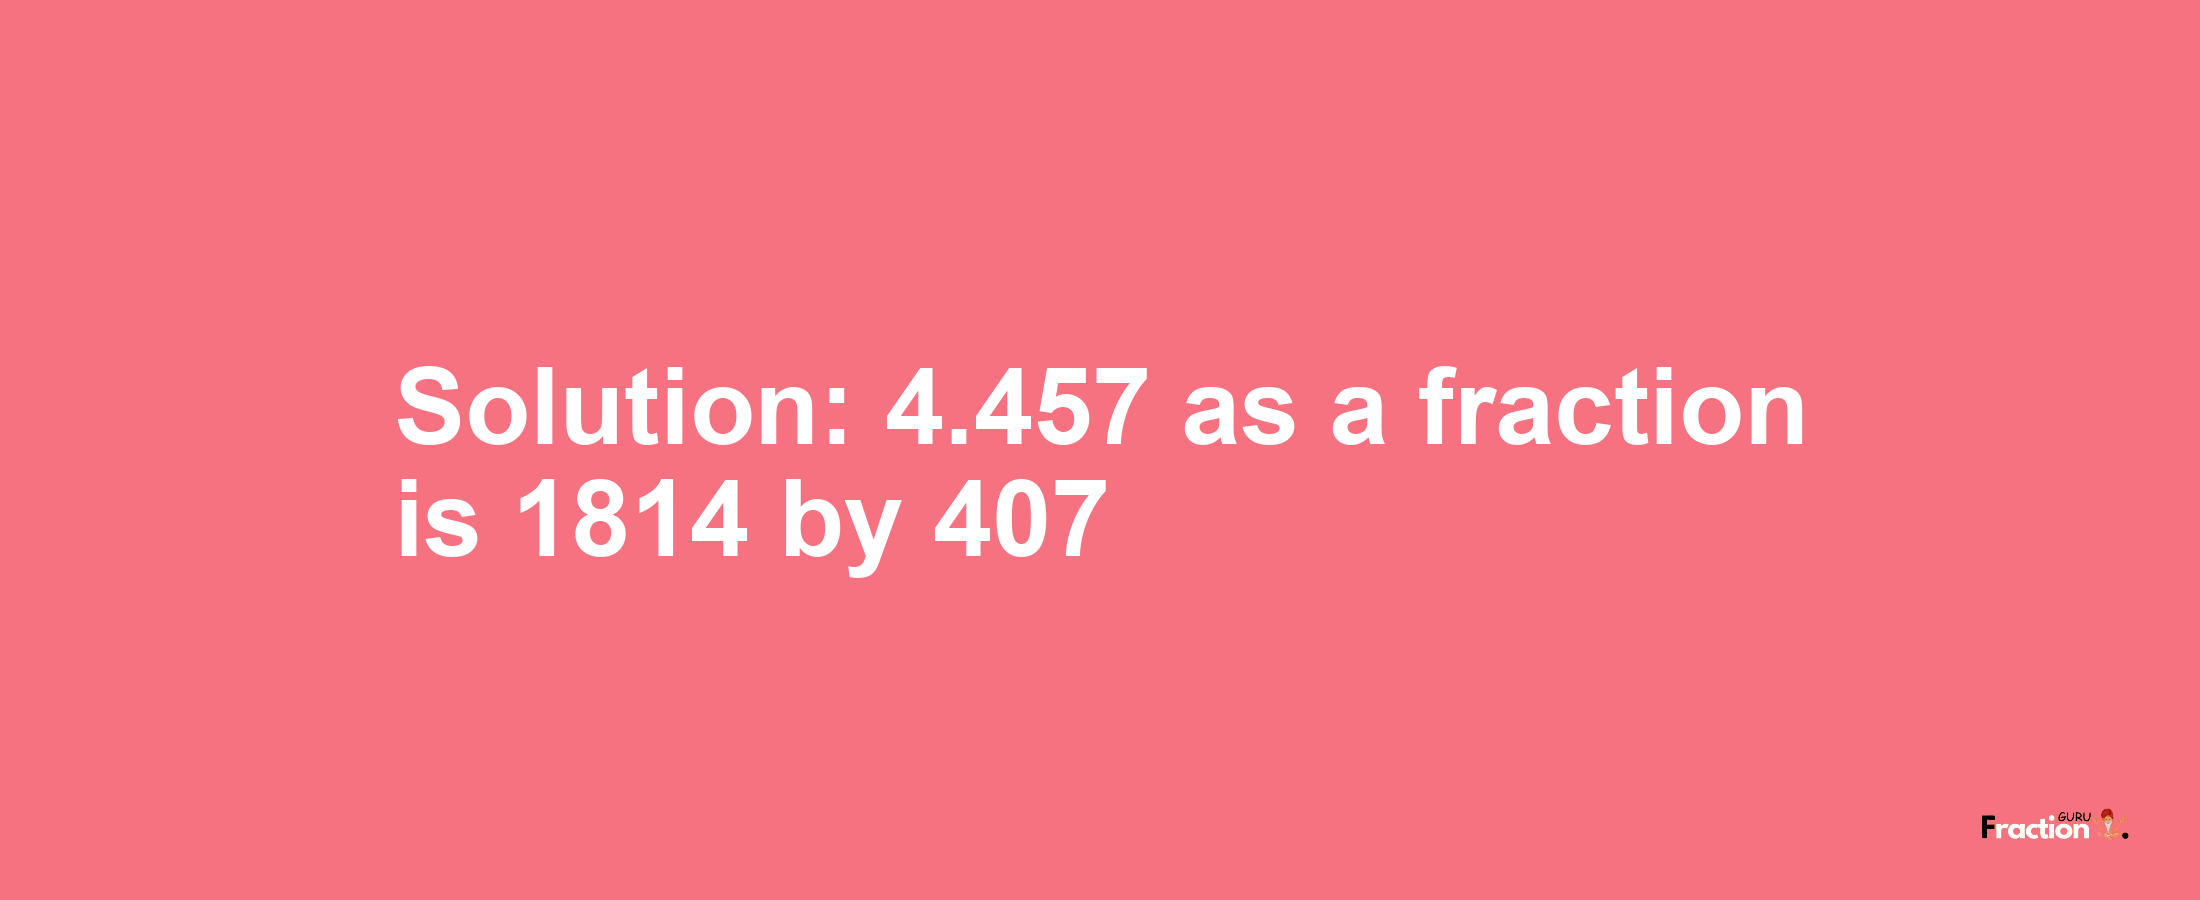 Solution:4.457 as a fraction is 1814/407